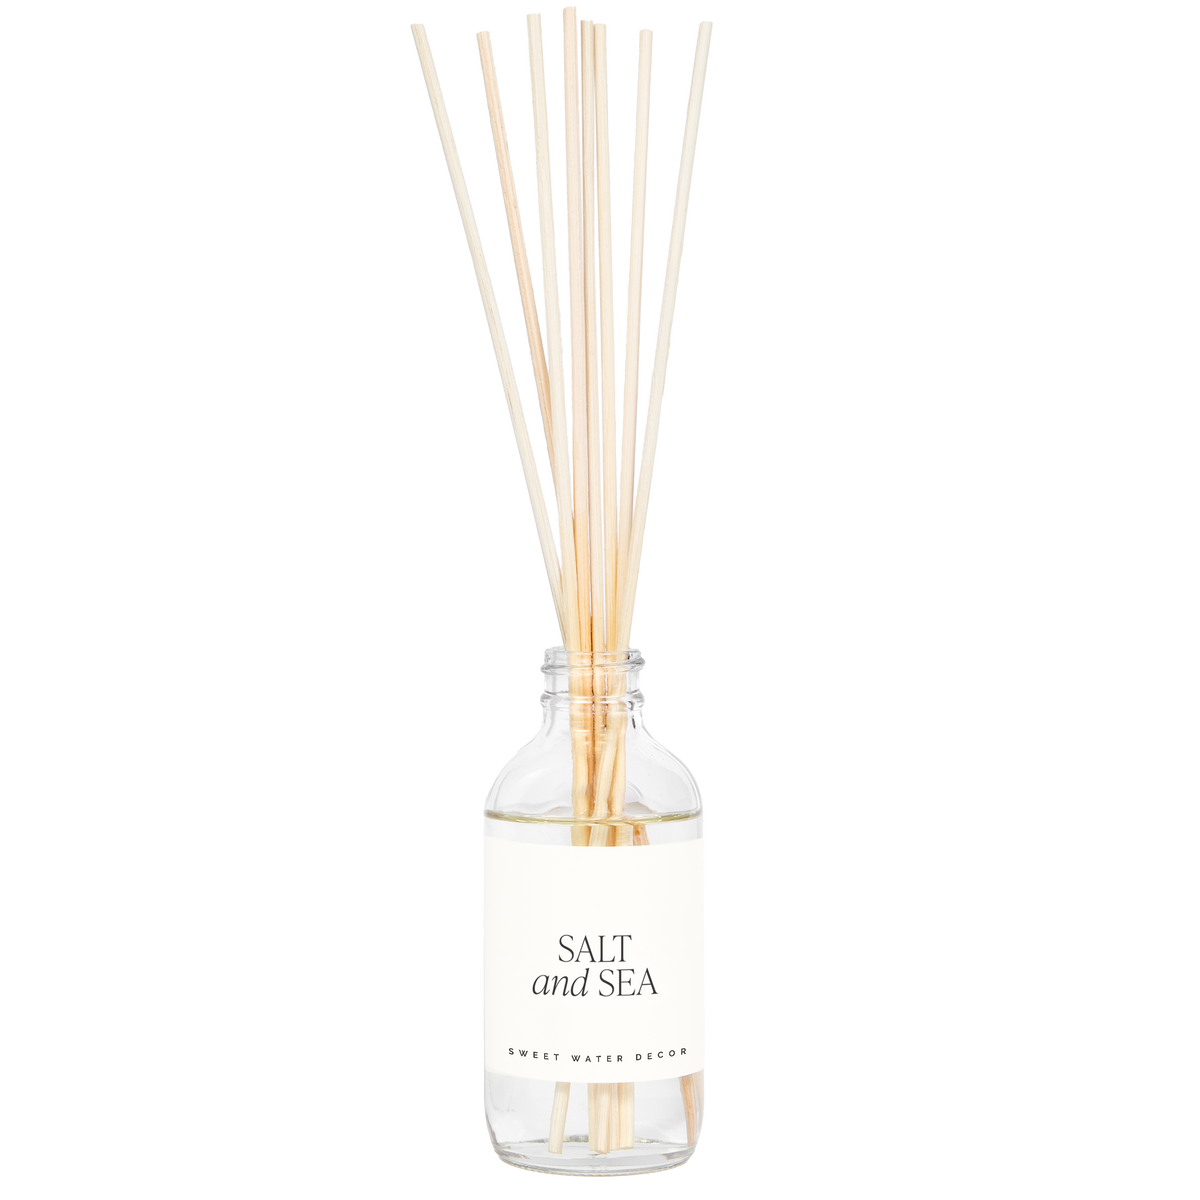 Salt and Sea Reed Diffuser - Gifts & Home Decor